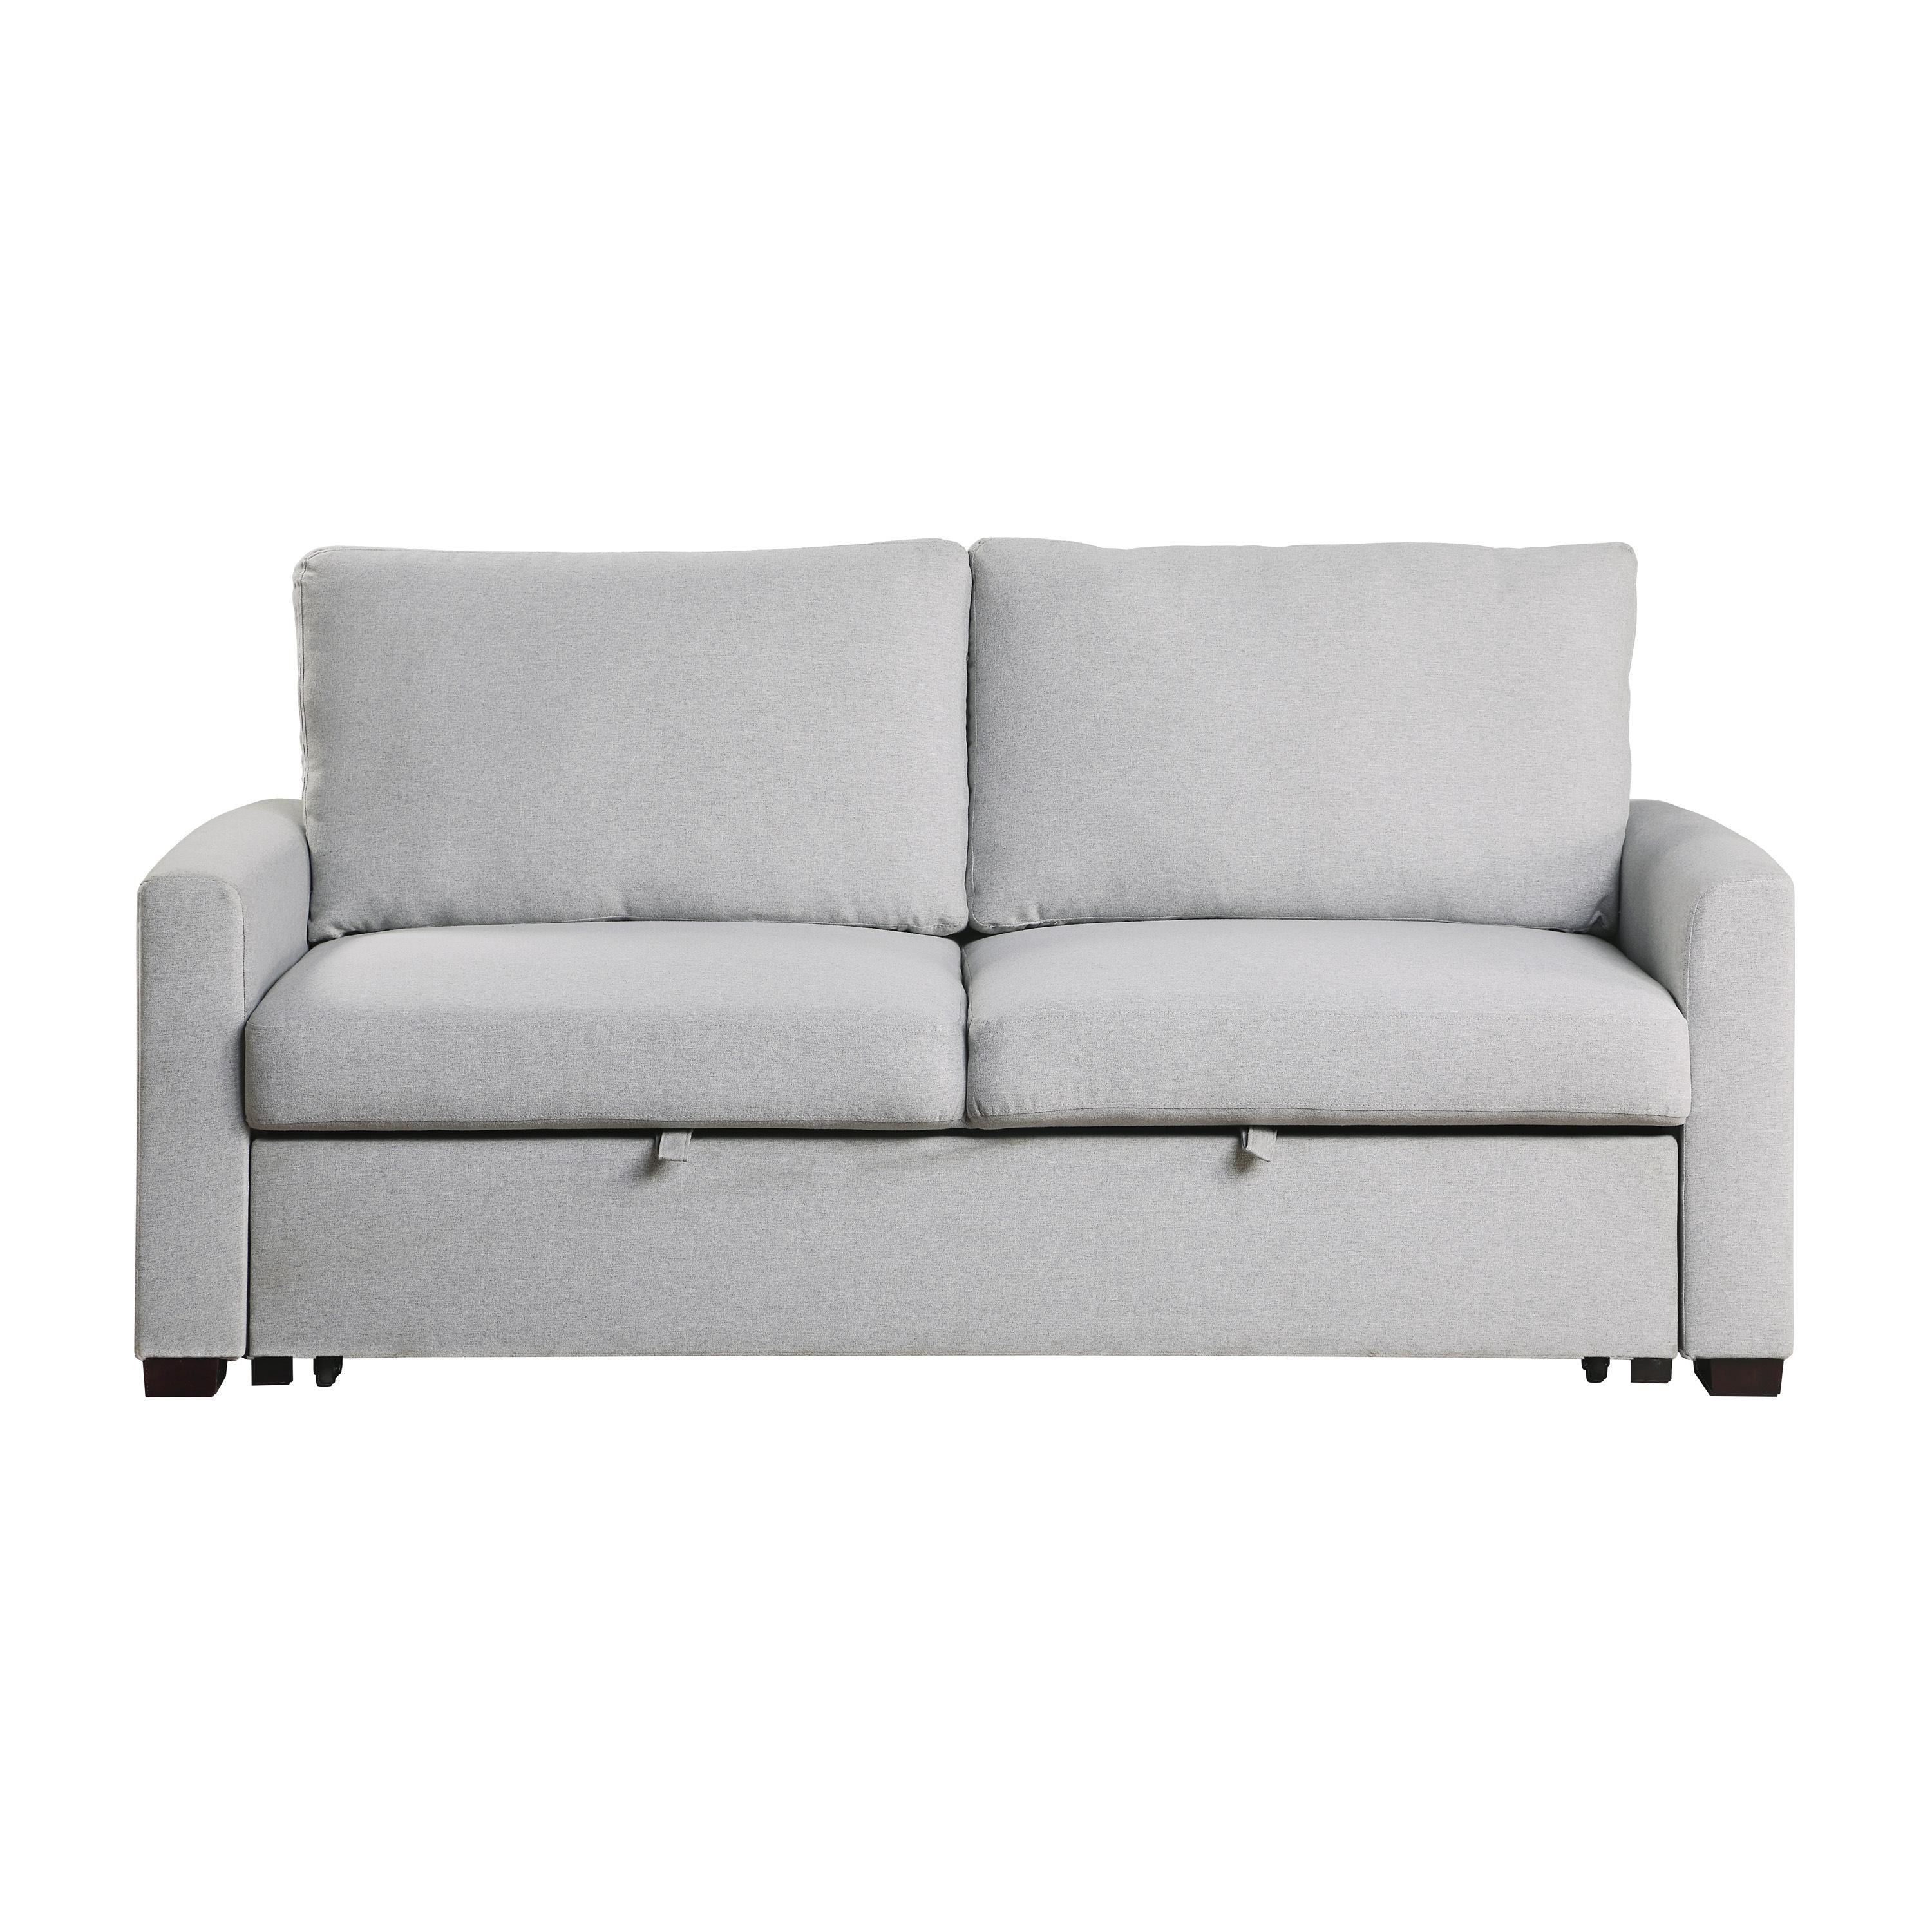 Contemporary Sofa 9525RF-3CL Price 9525RF-3CL in Gray 